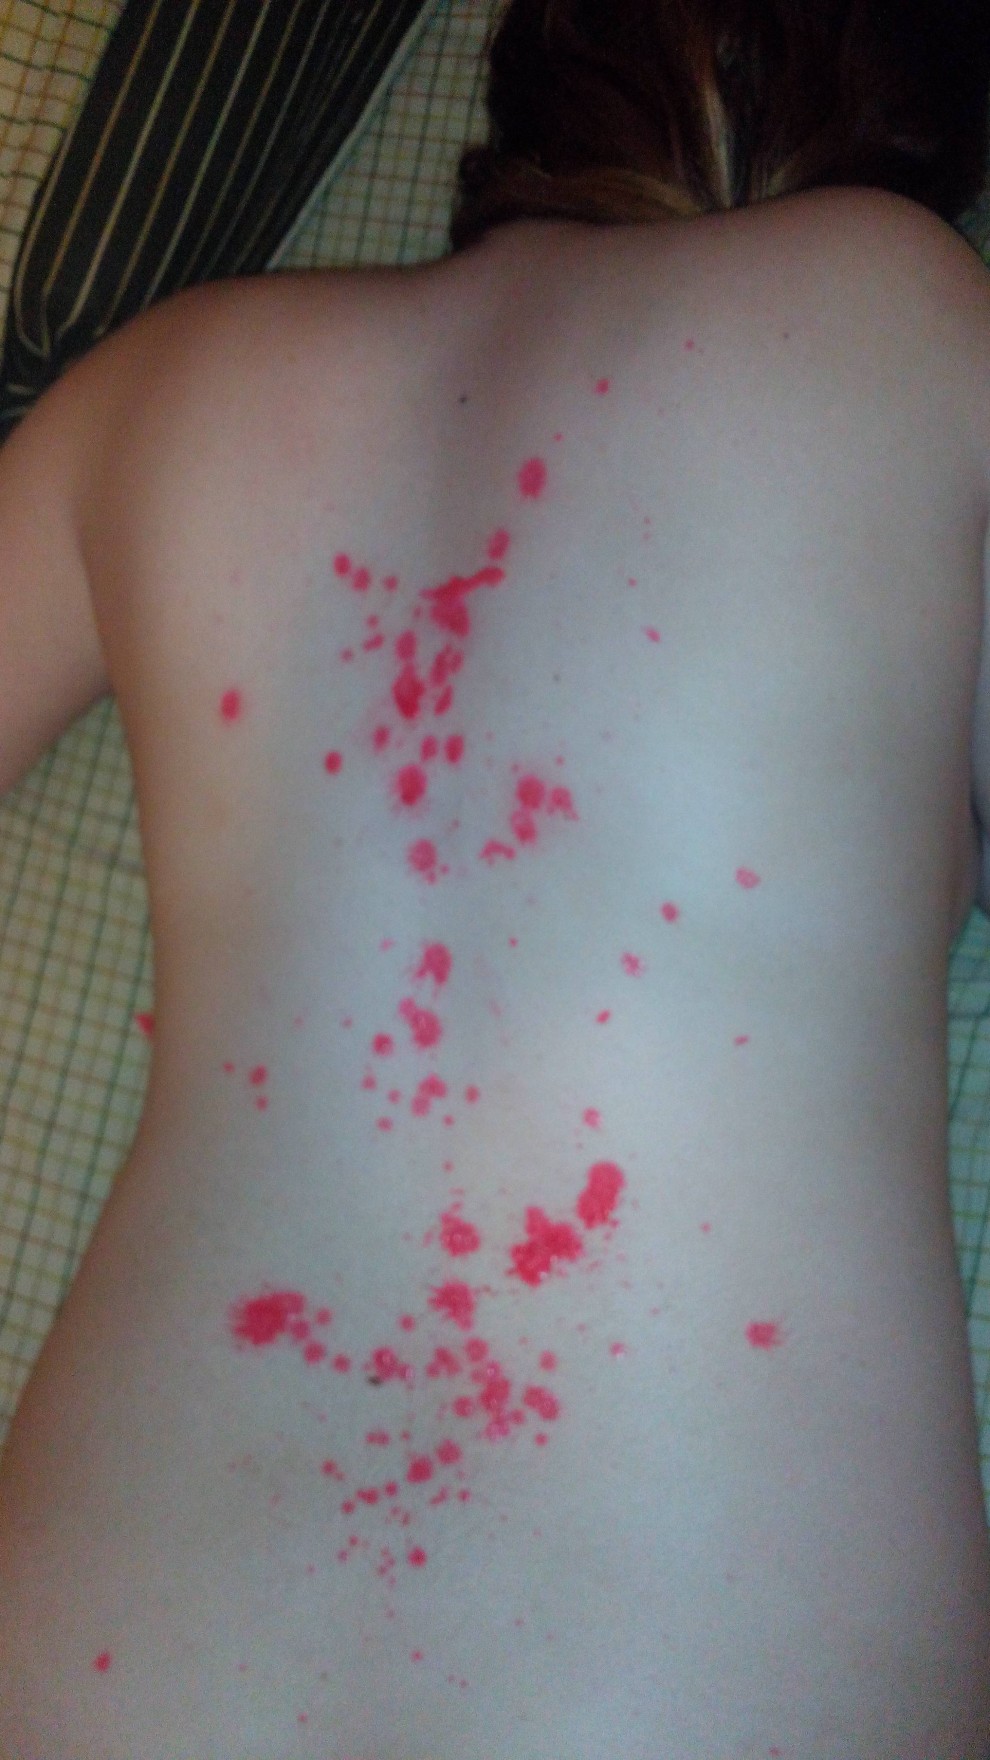 First time wax play